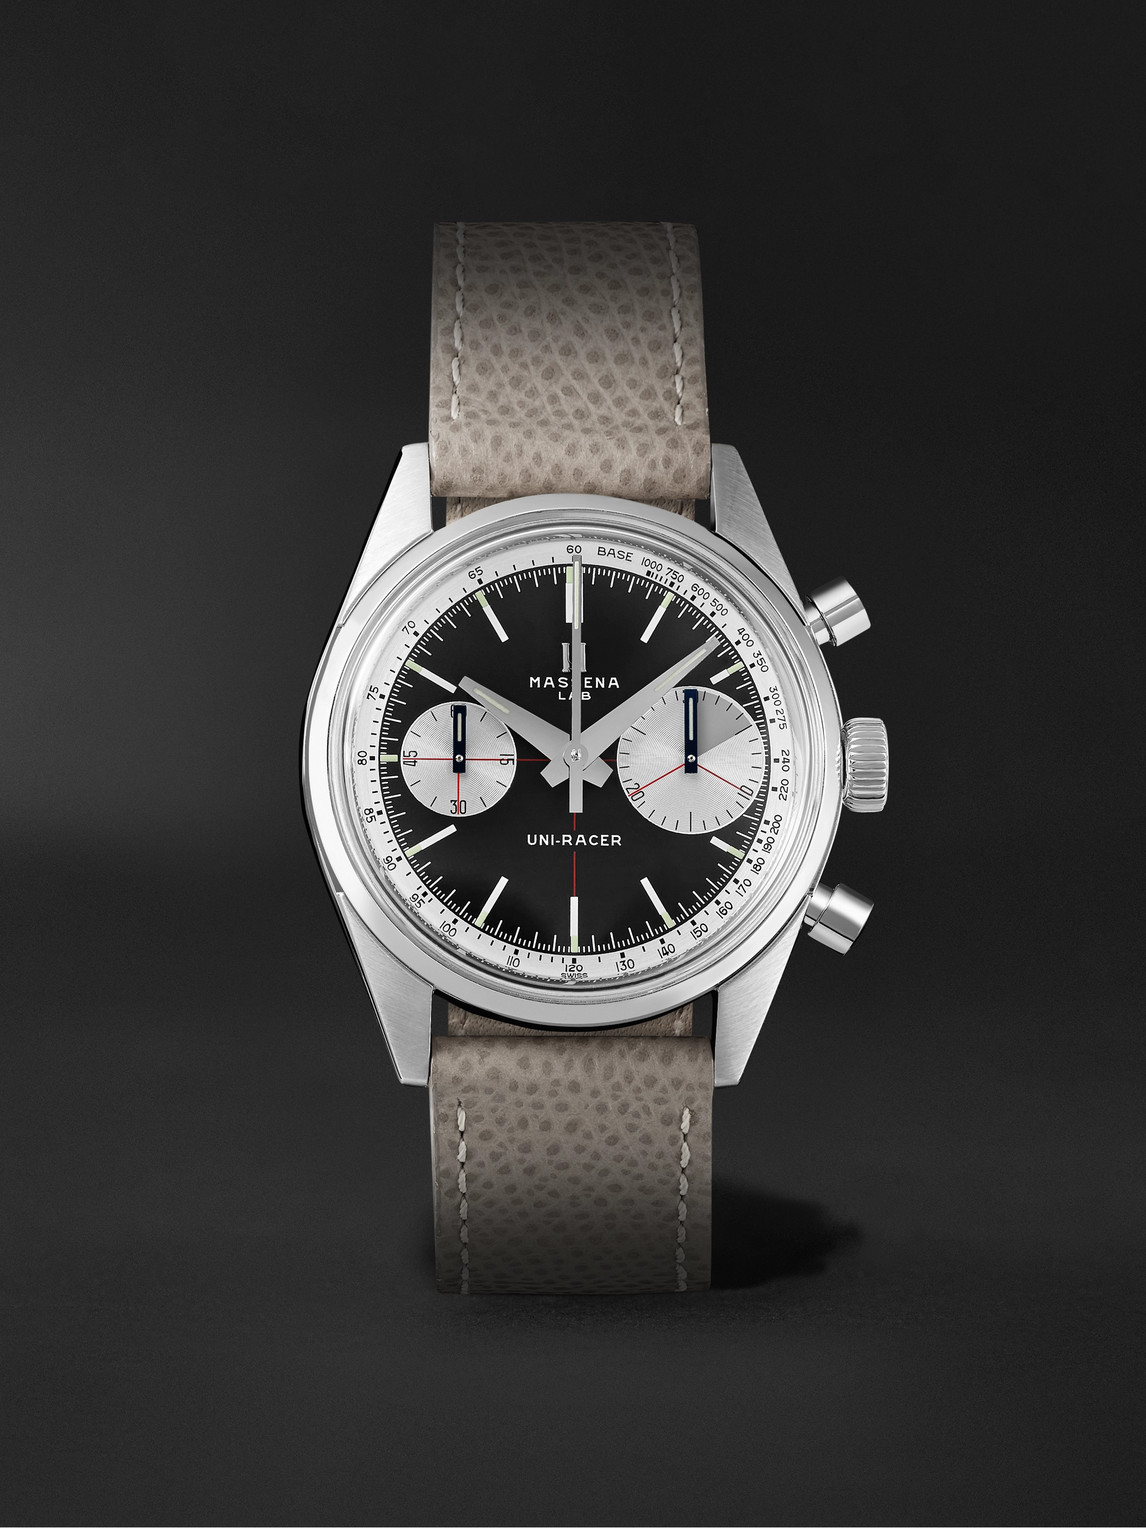 Uni-Racer Limited Edition Hand-Wound Chronograph 39mm Stainless Steel and Cross-Grain Leather Watch, Ref. No. UR-002